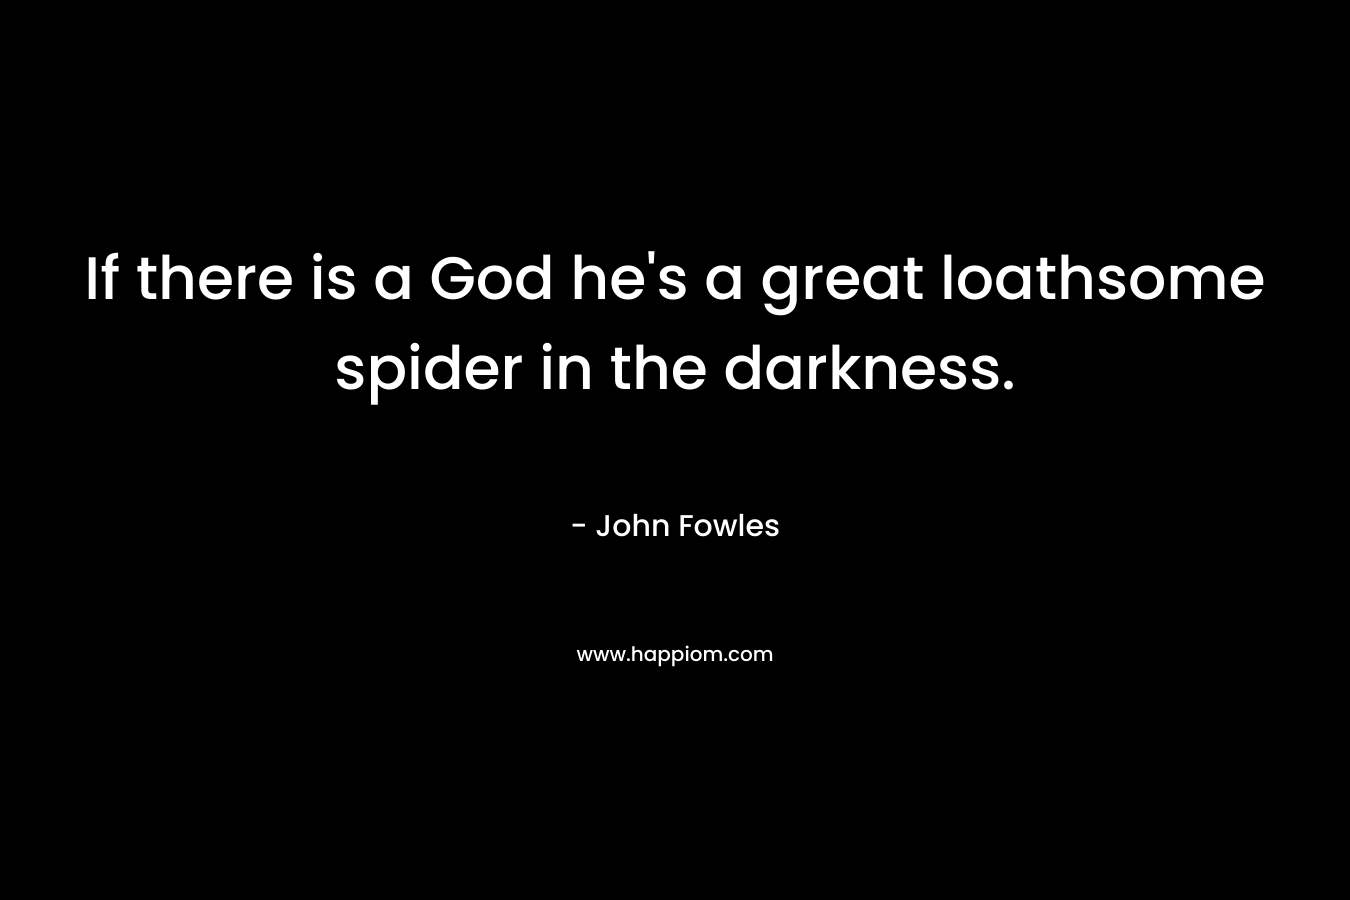 If there is a God he's a great loathsome spider in the darkness.